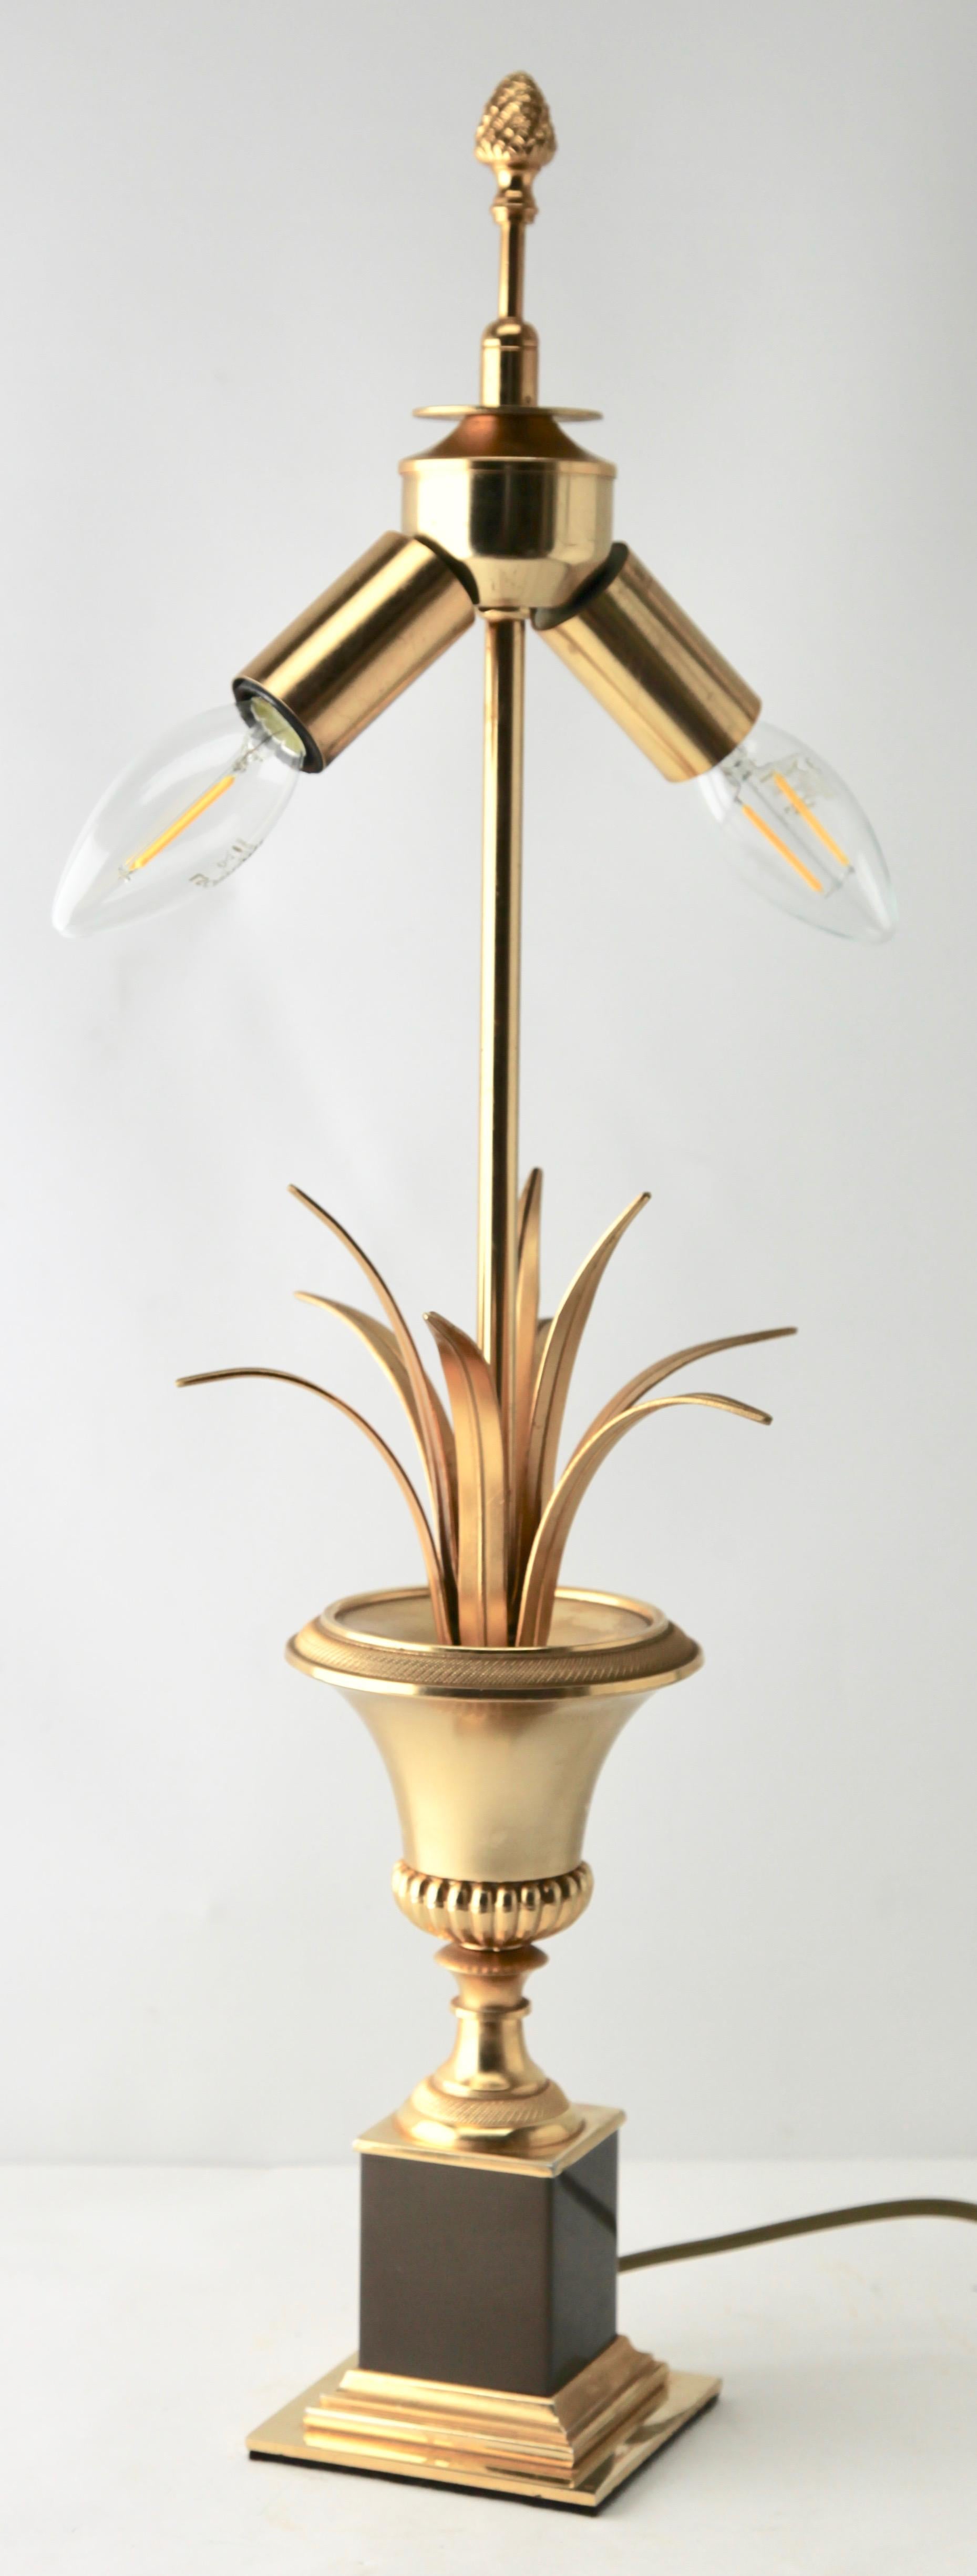 Mid-20th Century Hollywood Regency Sculptural Brass Palm Tree Table Lamp style of Maison Jansen For Sale